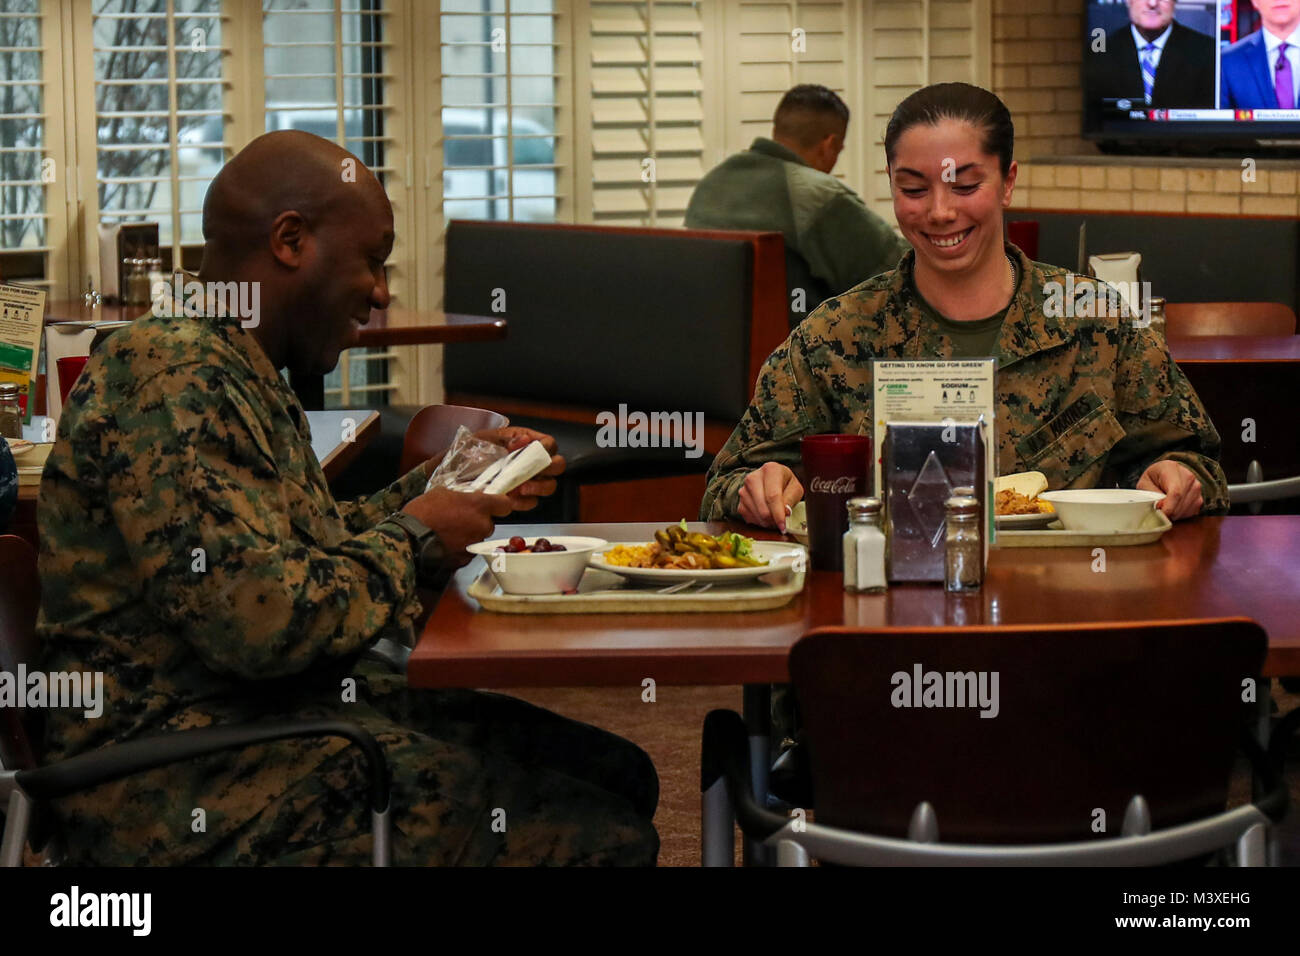 U.S. Marine Corps Sgt. Maj. Ronald L. Green, Sgt. Maj. of the Marine Corps, and Lance Cpl. Jordan Tarnowske, an out bound administration clerk with 8th Marine Corps Recruiting District, eat afternoon chow on Naval Air Station Joint Reverse Base on February 6, 2018. The 8th Marine Corps Recruiting District is the largest district, covering over 1 million square miles in 13 states. (U.S. Marine Corps photo by Sgt. Clarence A. Leake) Stock Photo